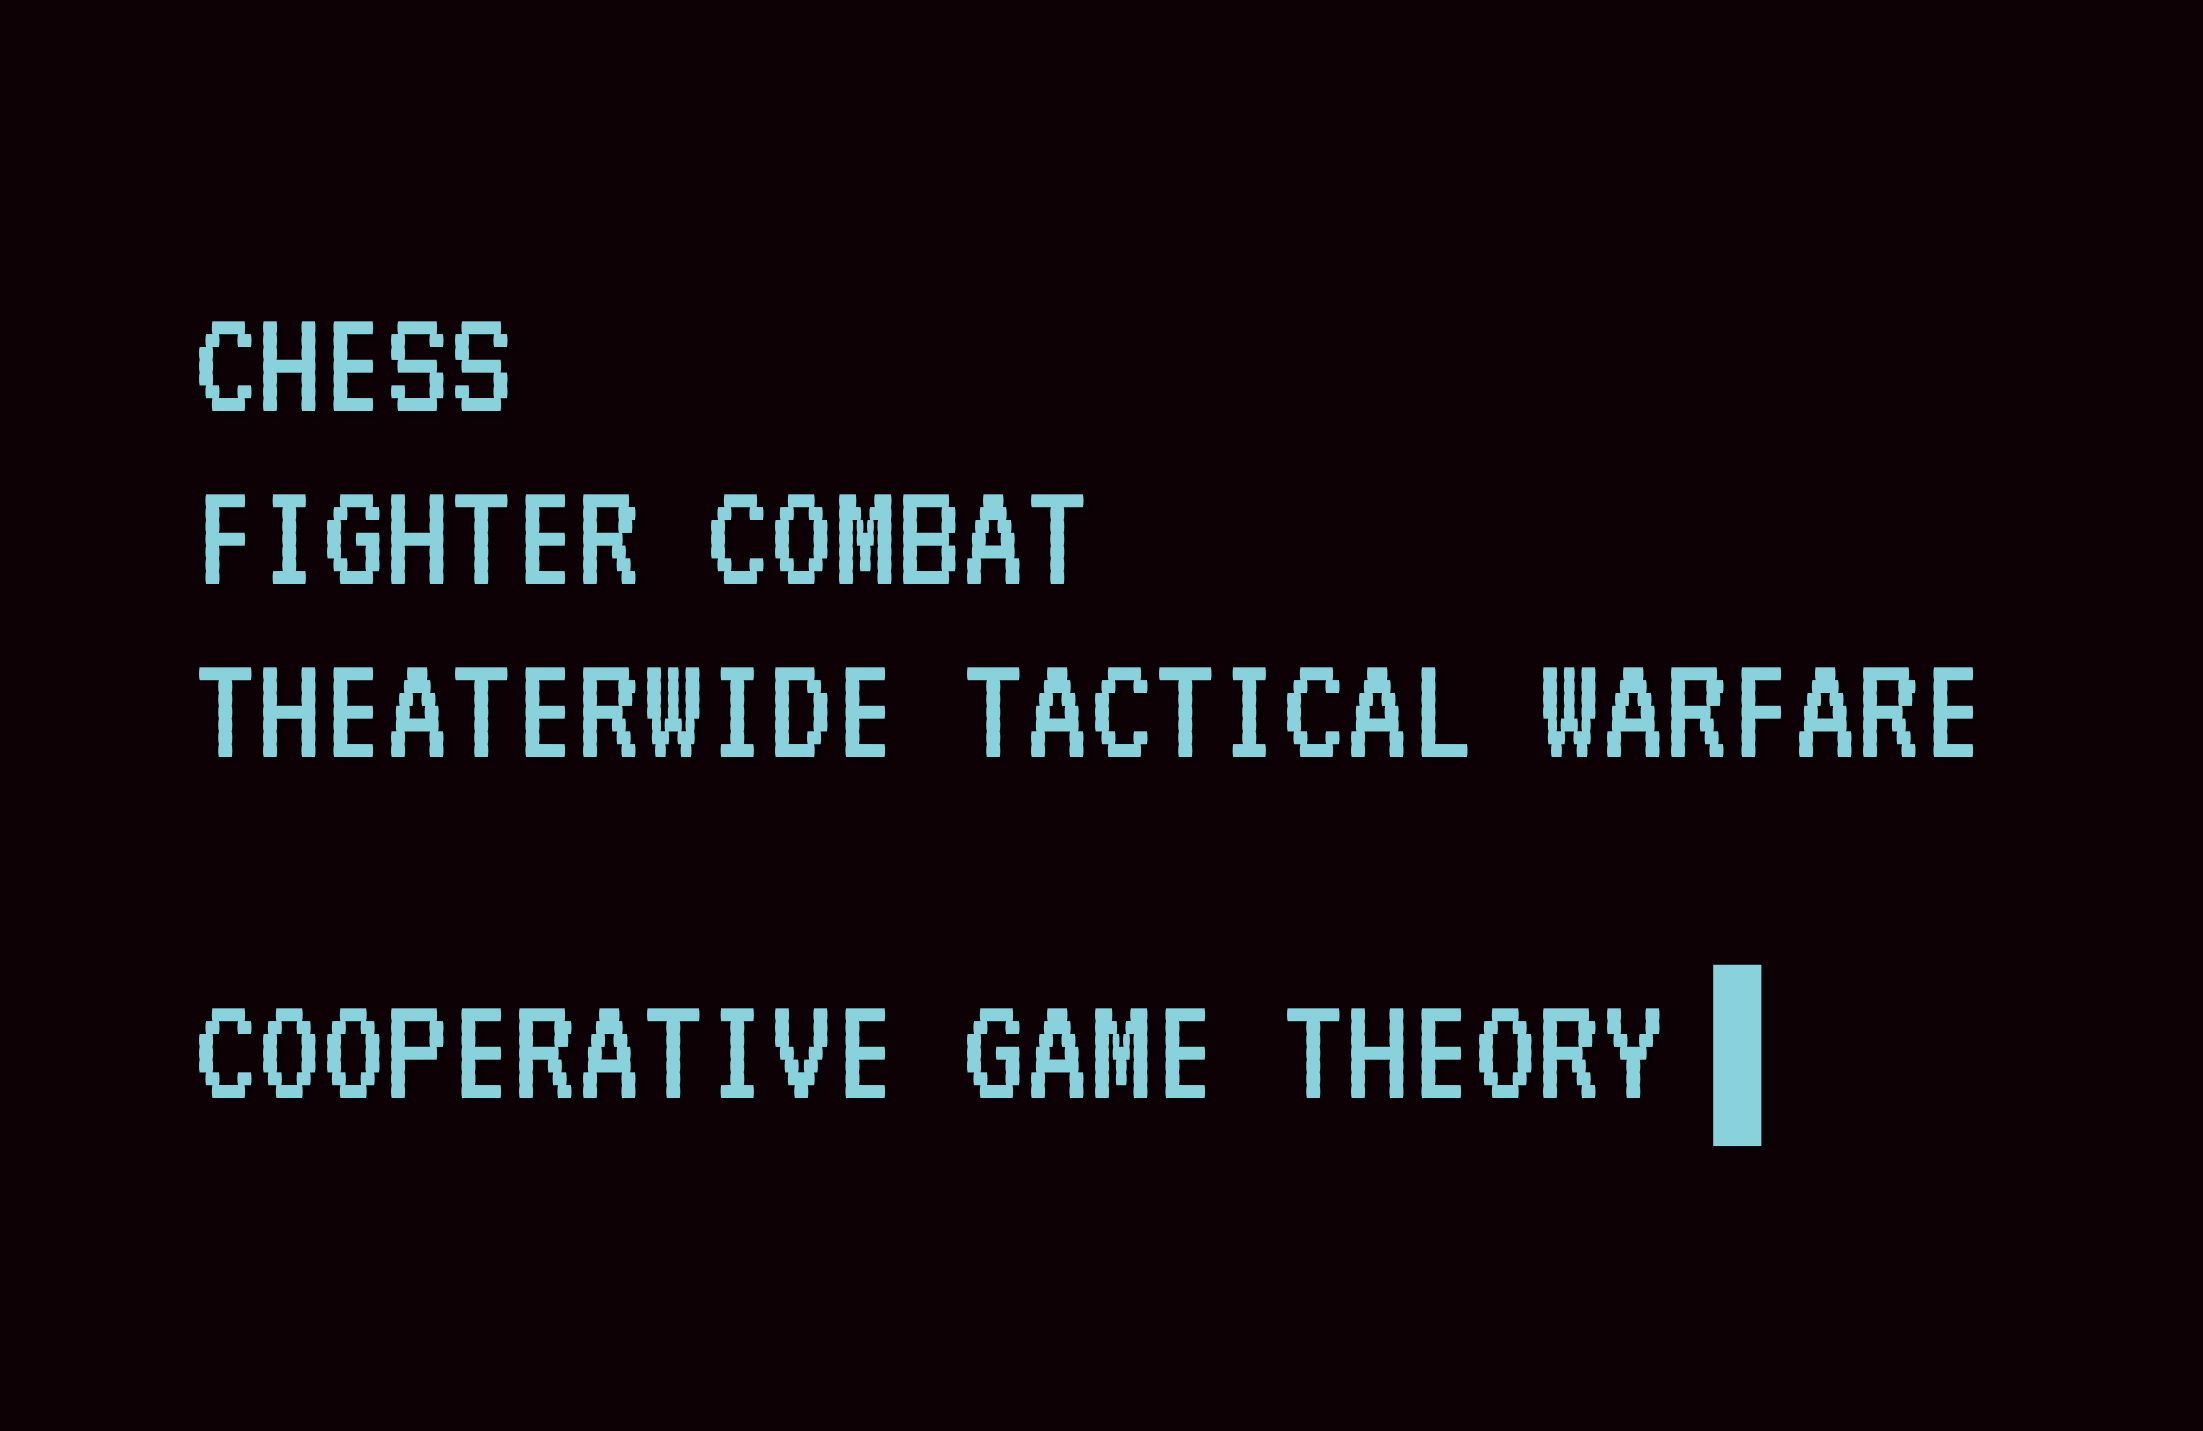 An interface in the style of War Games asking if you want to play chess, fighter combat, theaterwide tactical warfare, or cooperative game theory